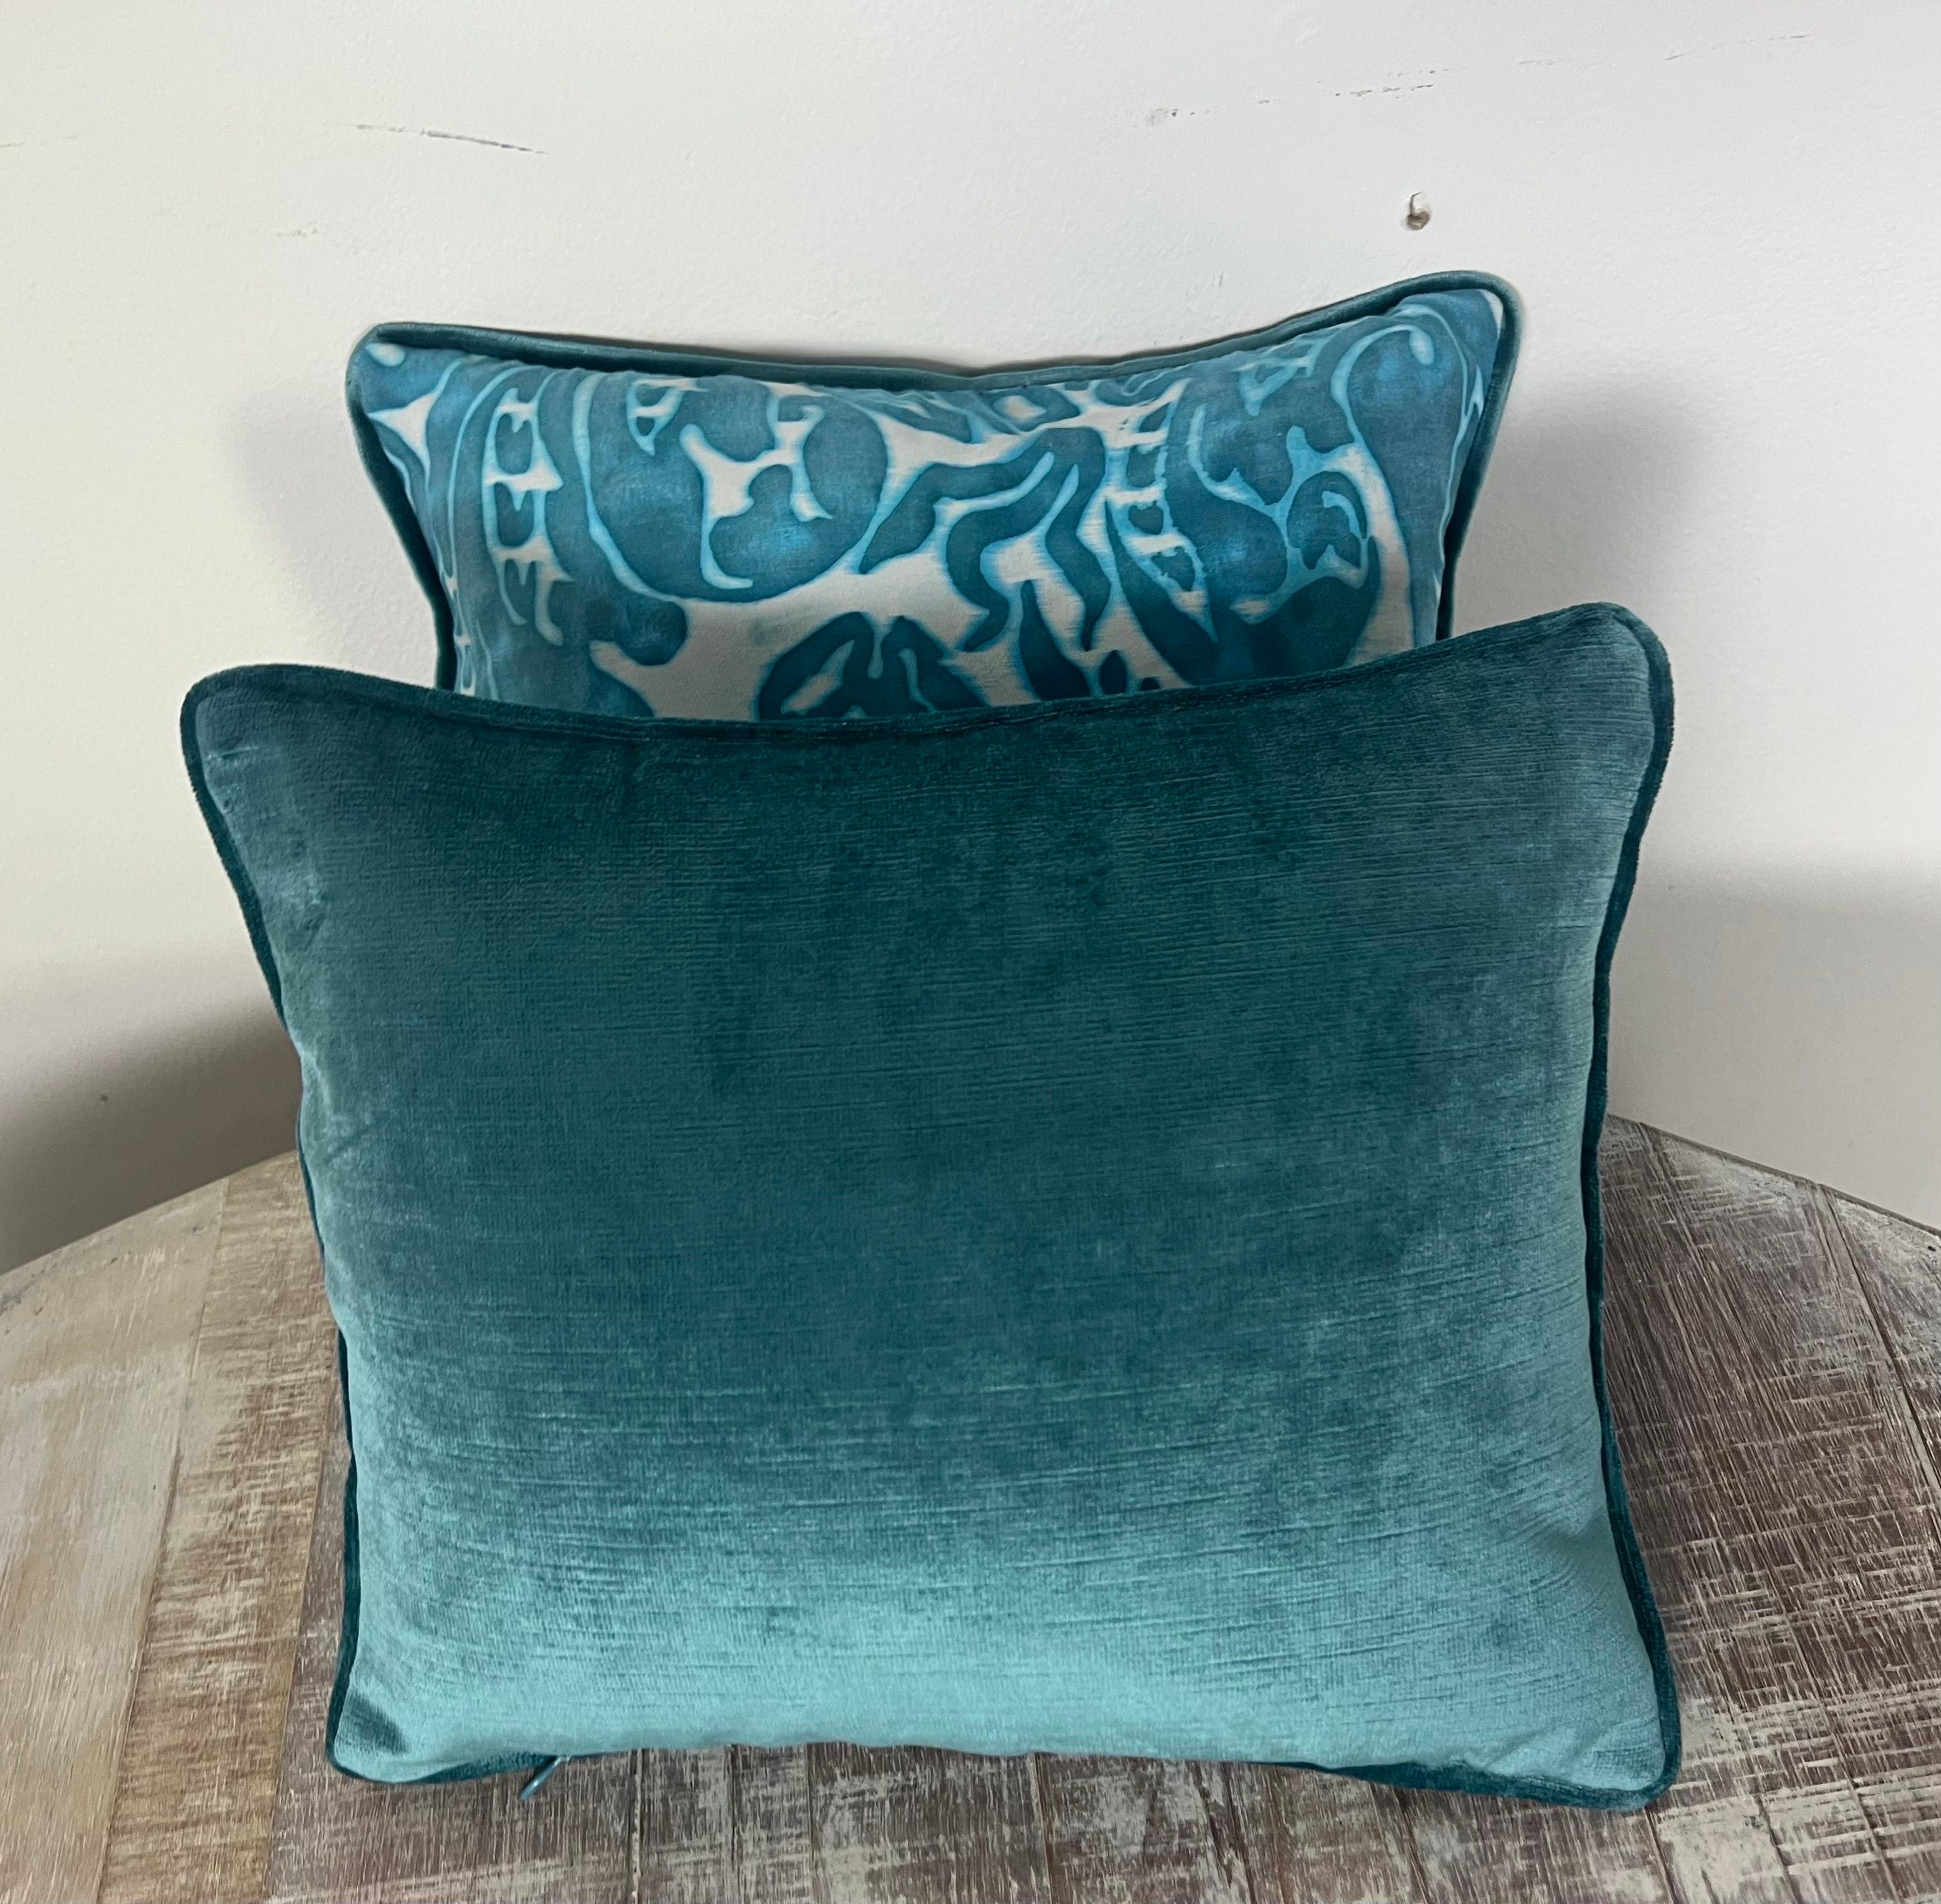 Pair of Teal and White Colored Fortuny Style Pillows In Excellent Condition For Sale In Los Angeles, CA